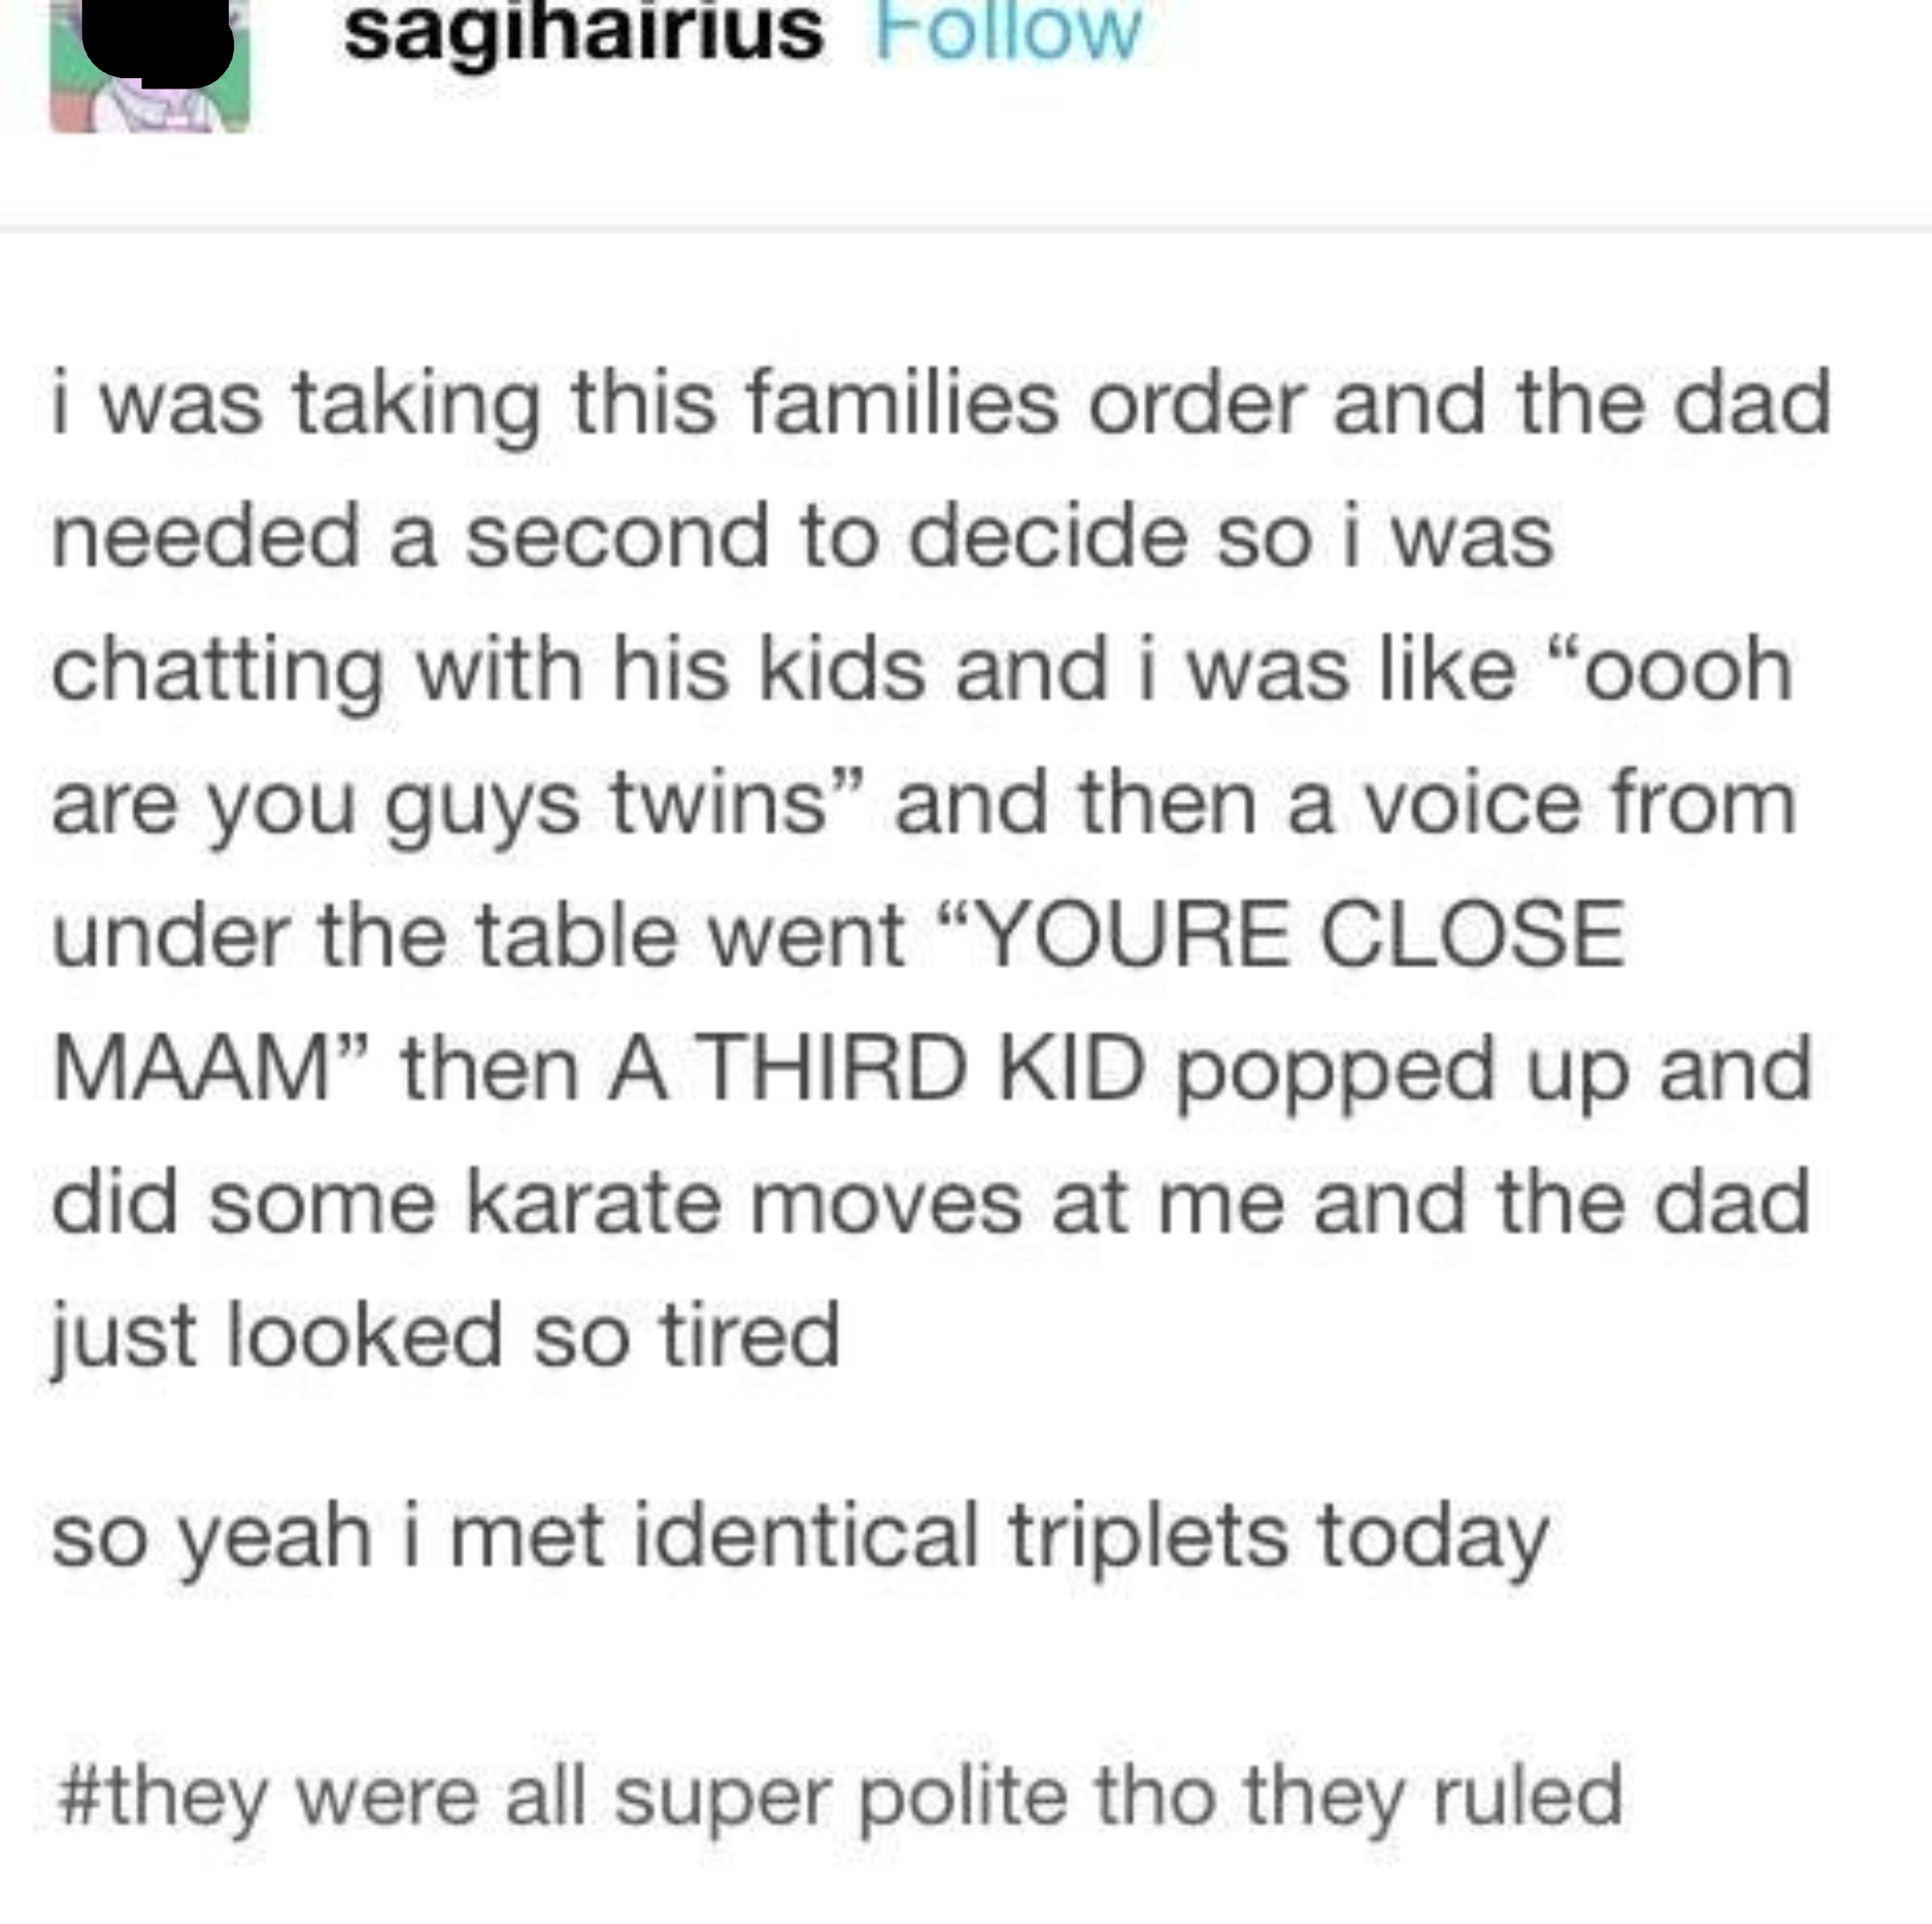 Story about someone taking a dad&#x27;s order and asking his two kids if they&#x27;re twins, and another child under the table says &quot;You&#x27;re close&quot; and does some karate moves, so they met identical triplets, and the dad just looked so tired